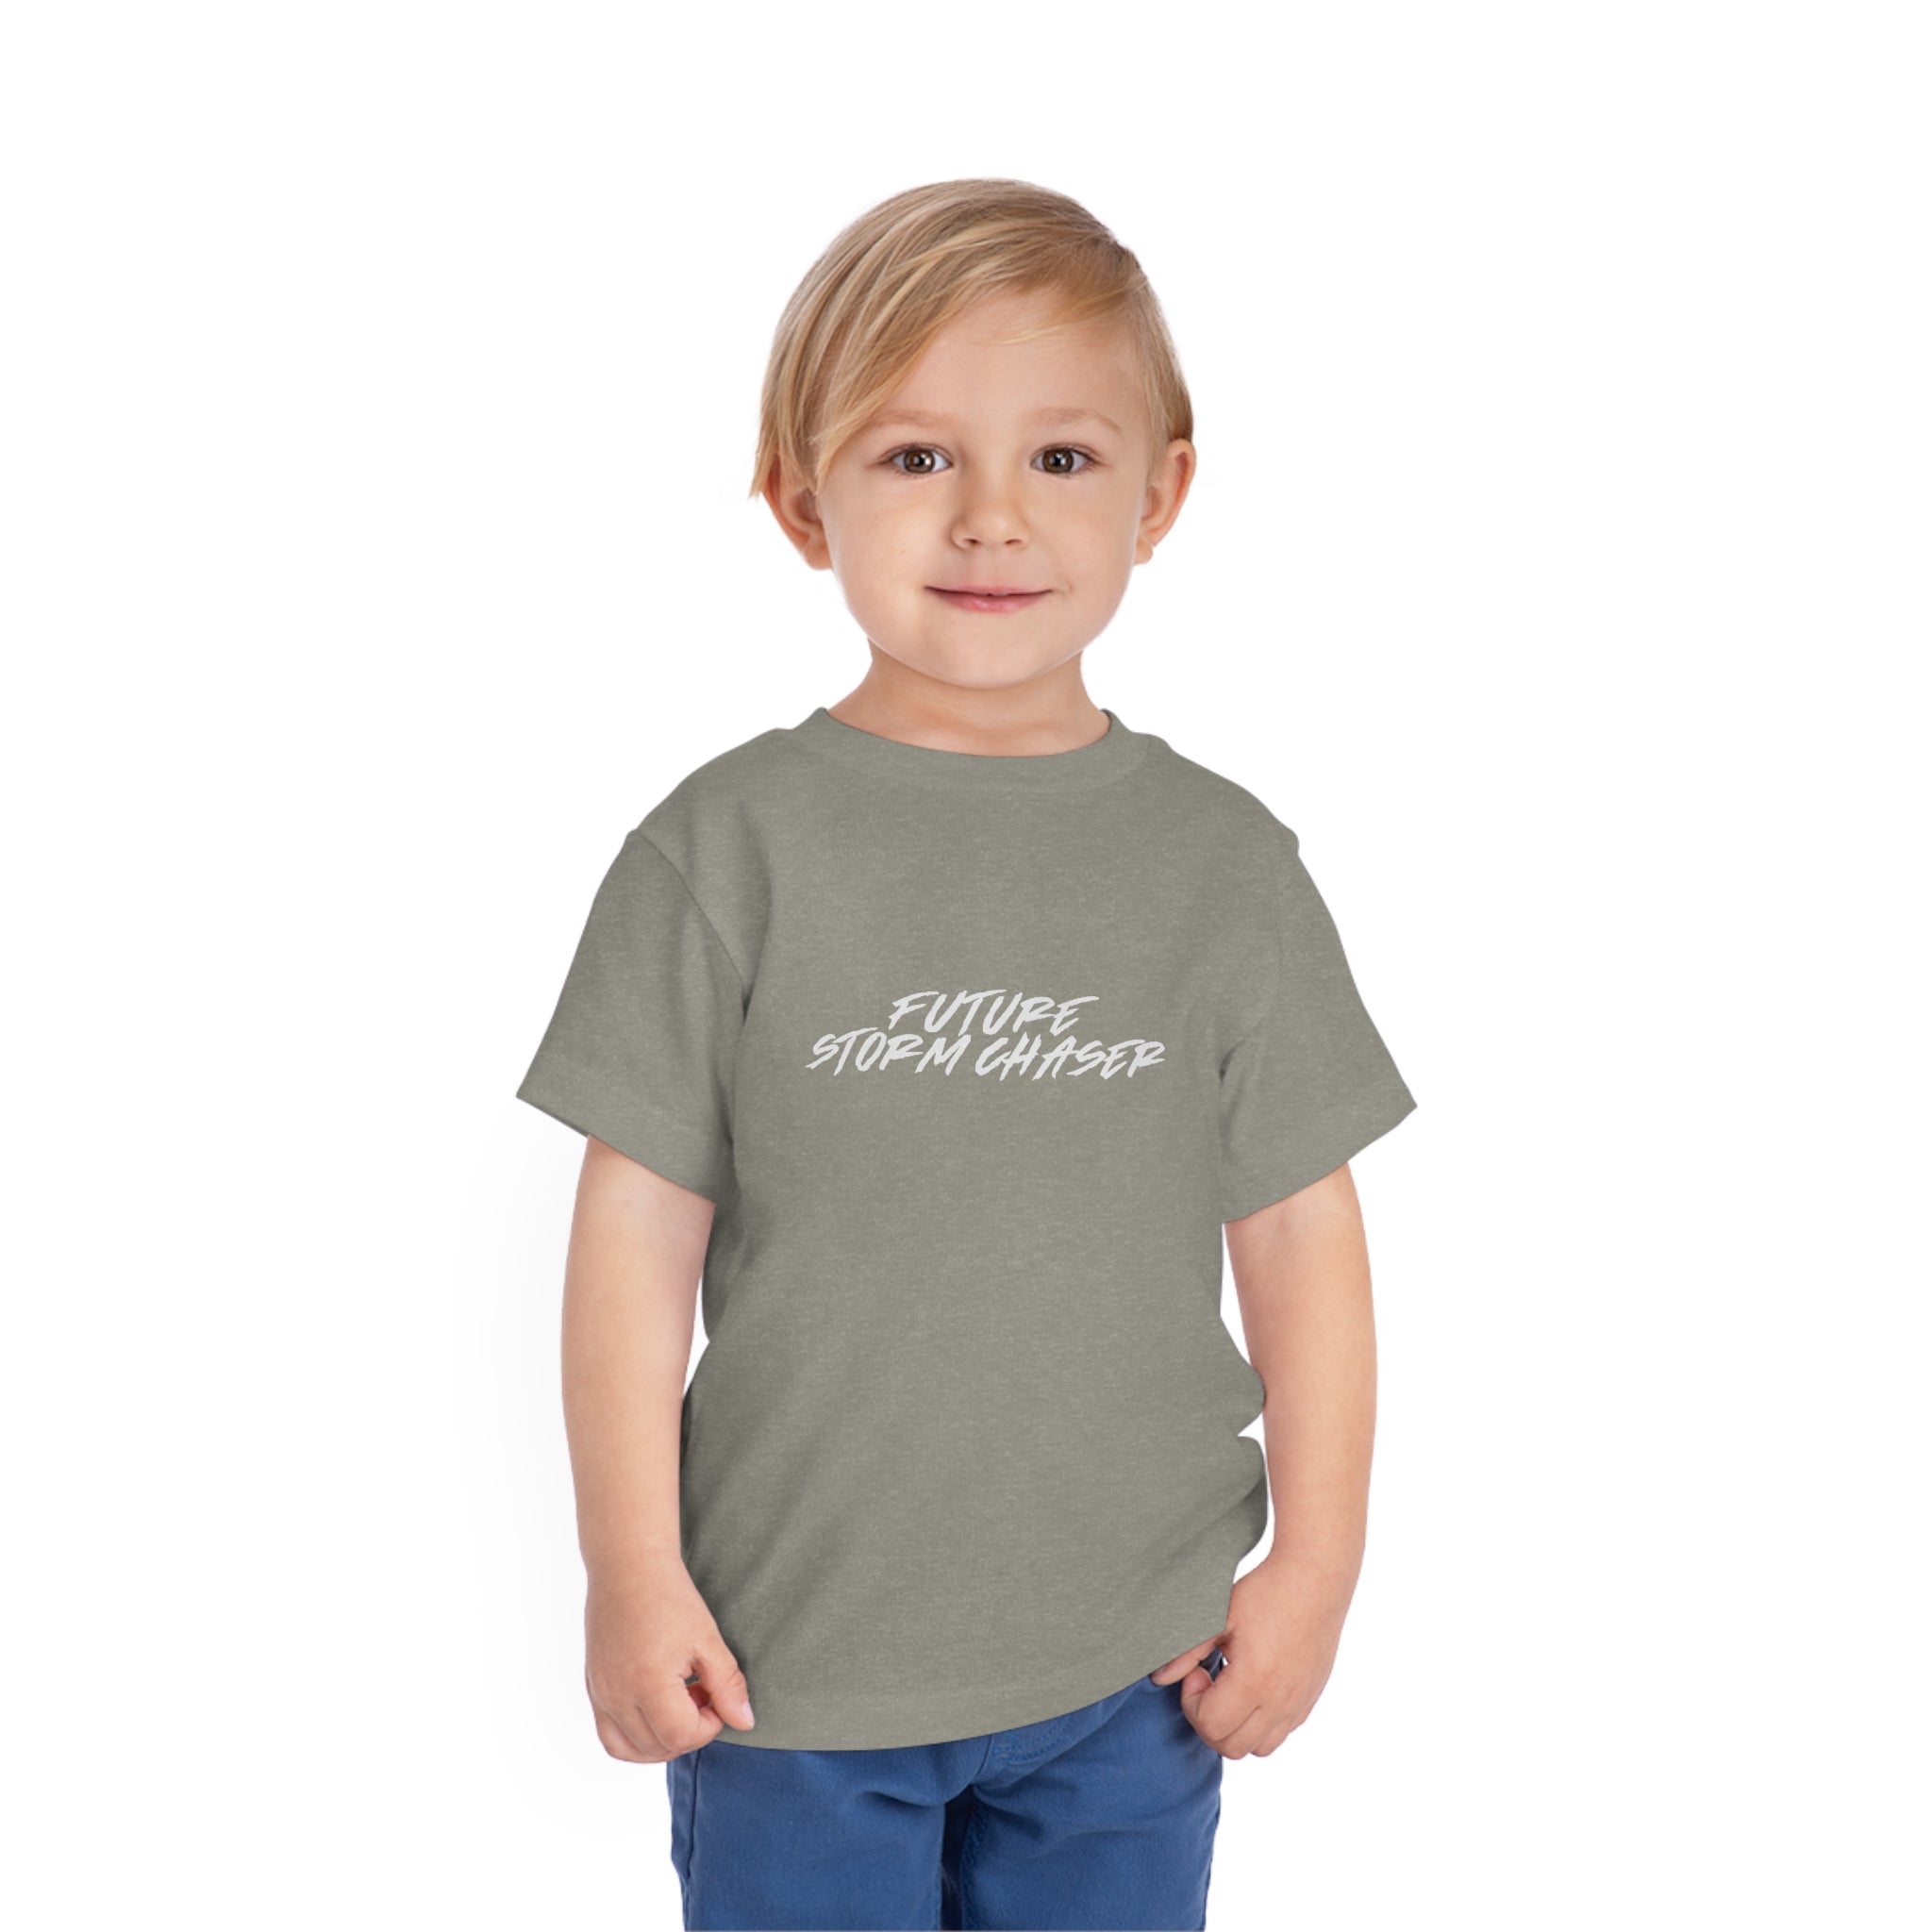 Future Storm Chaser Toddler Tee 